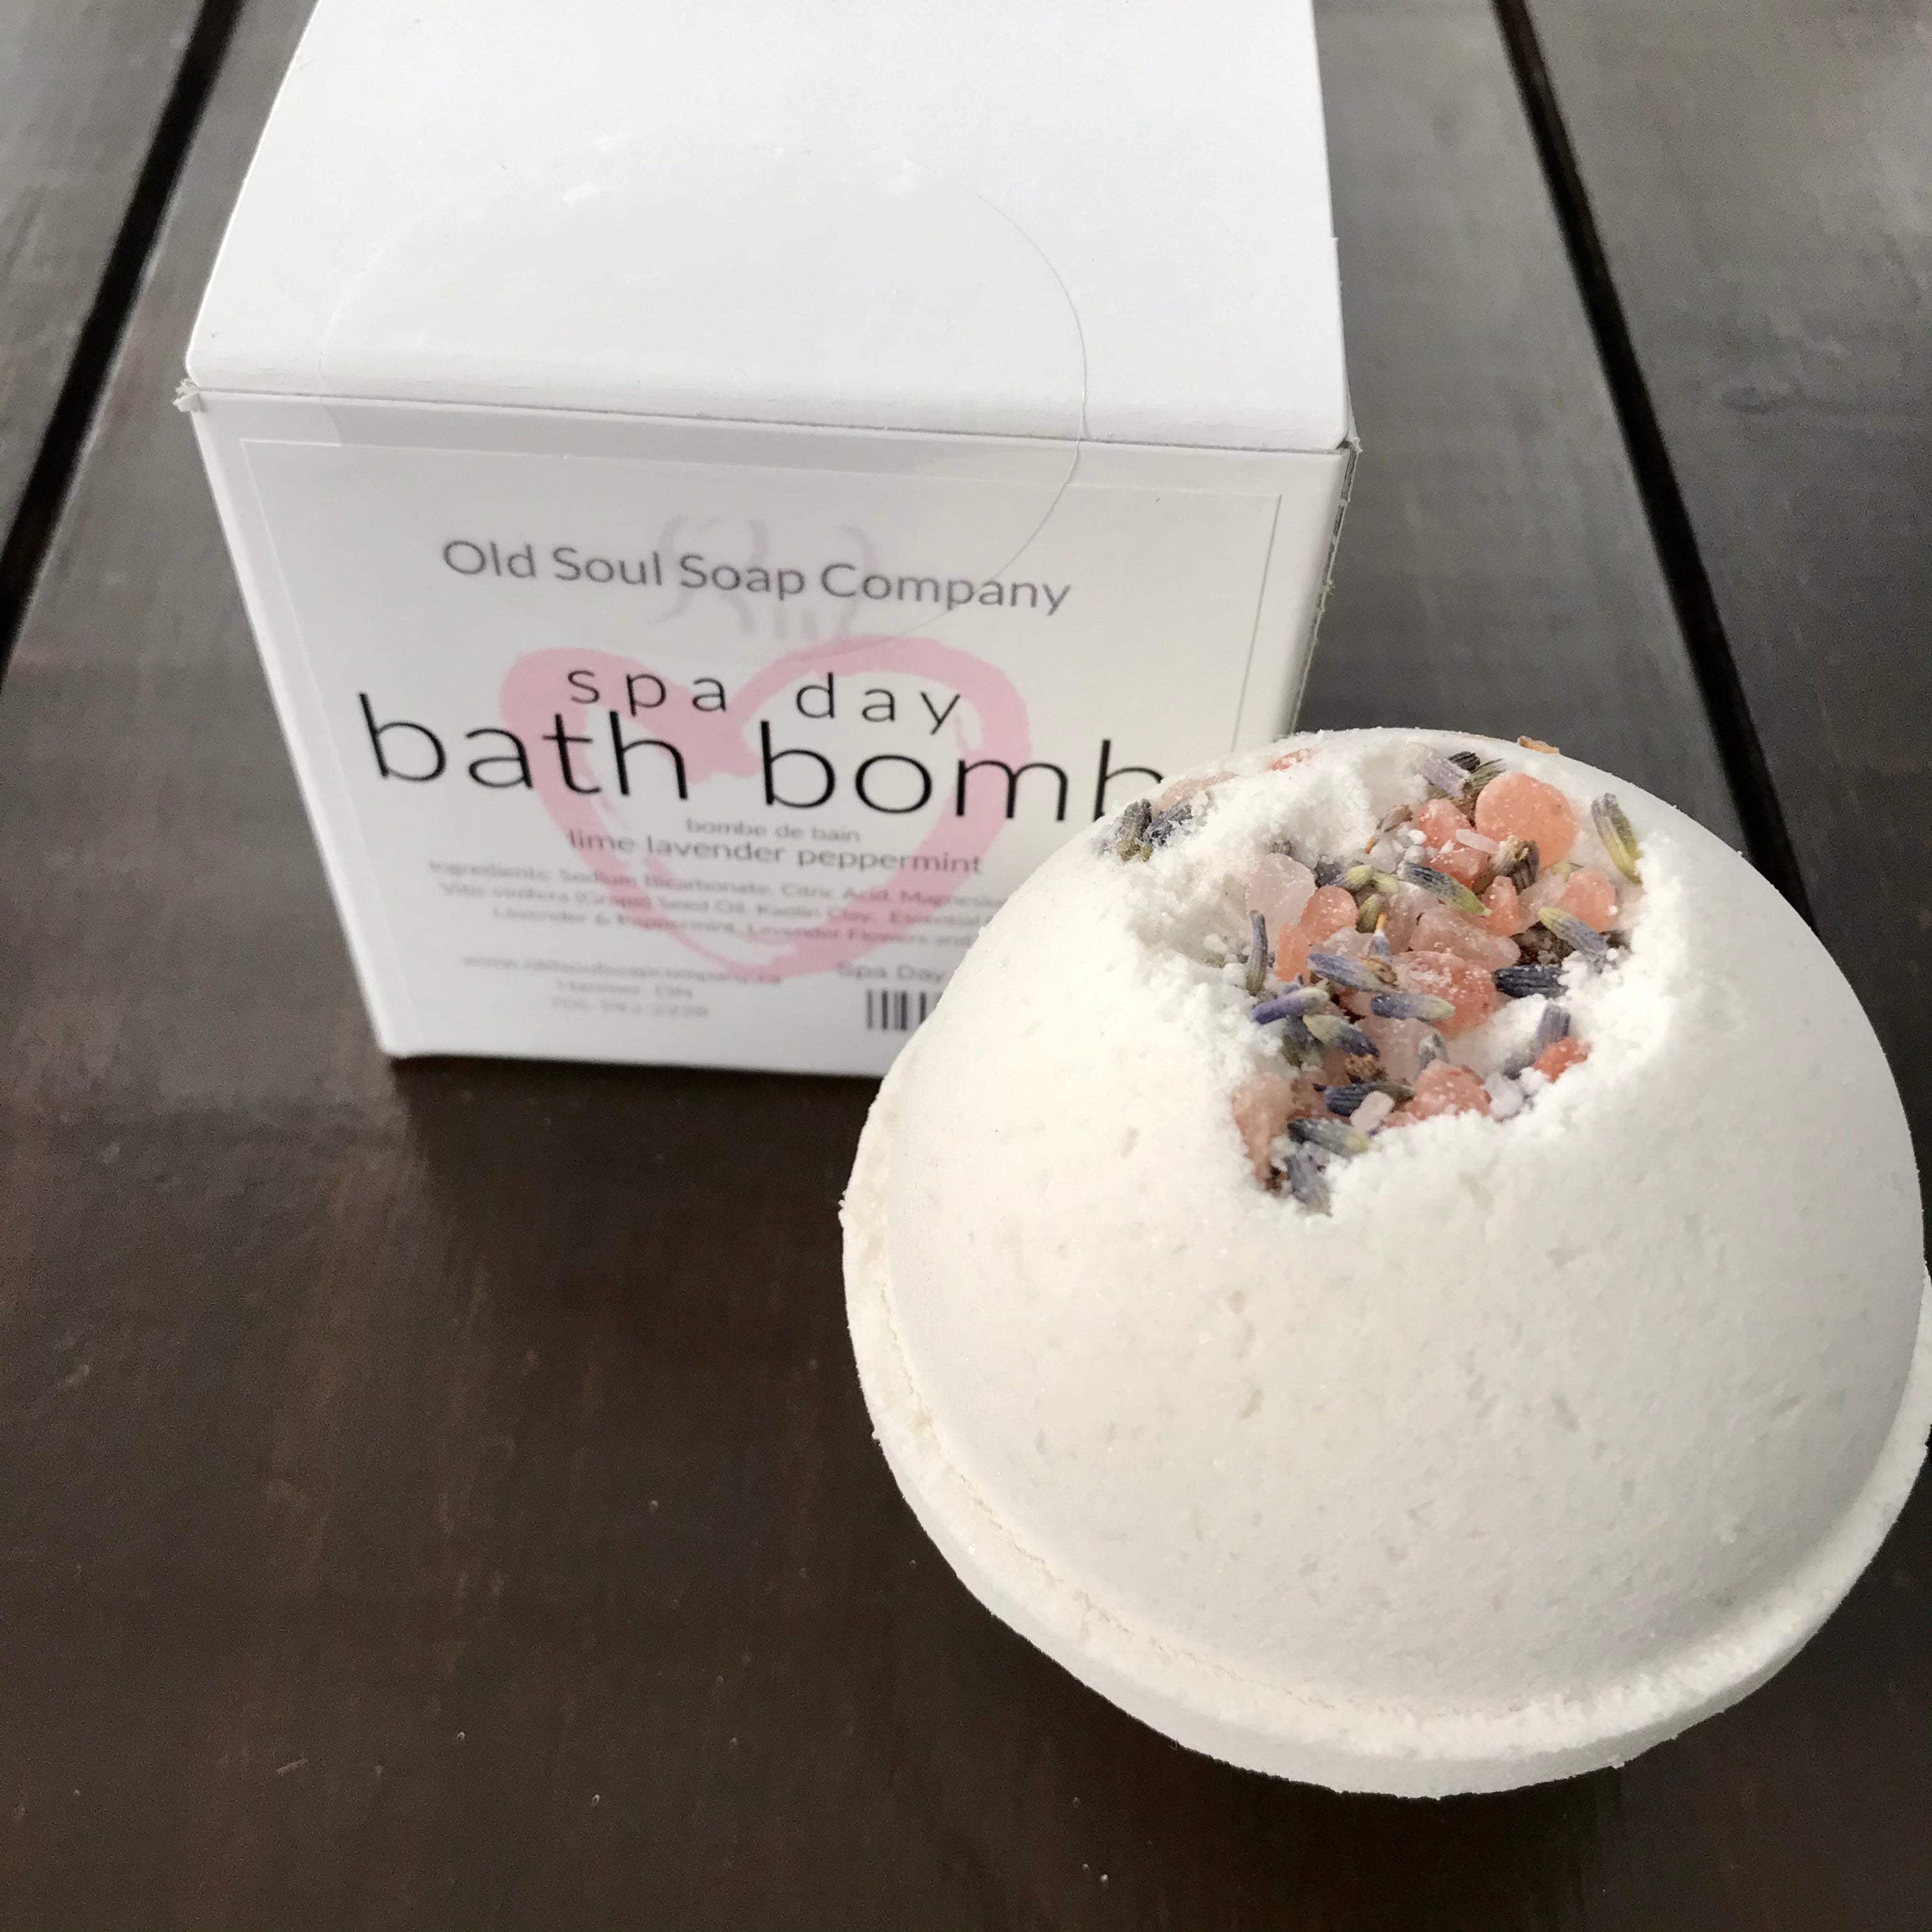 canadian made lime lavender peppermint bath bomb in a box